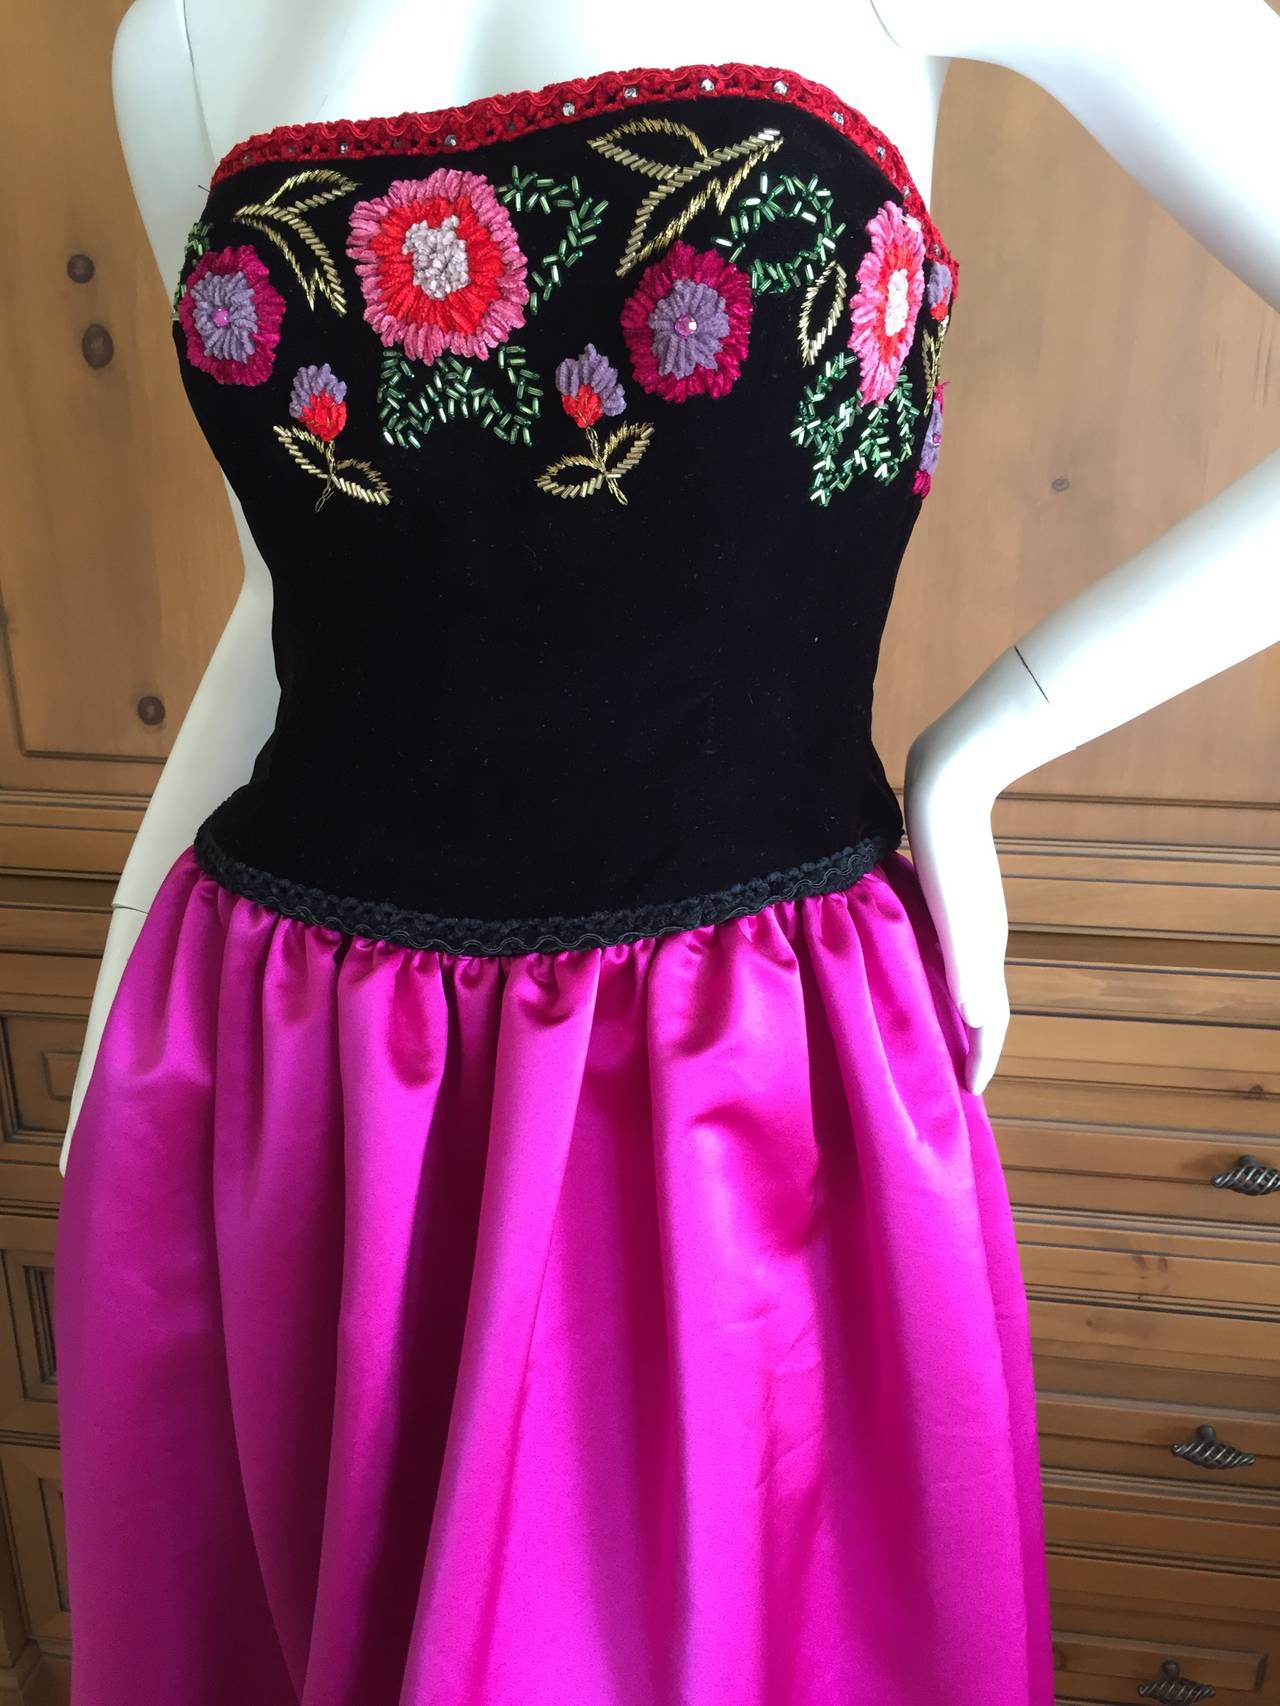 Victoria Royal Wonderful Folkloric Embroidered Vintage Ball Gown.
Black velvet bodice with Mexican Folkloric pattern embroidery with a hot pink silk skirt.
Victoria Royal Ltd was a dress company in Hong Kong which produced evening wear for the